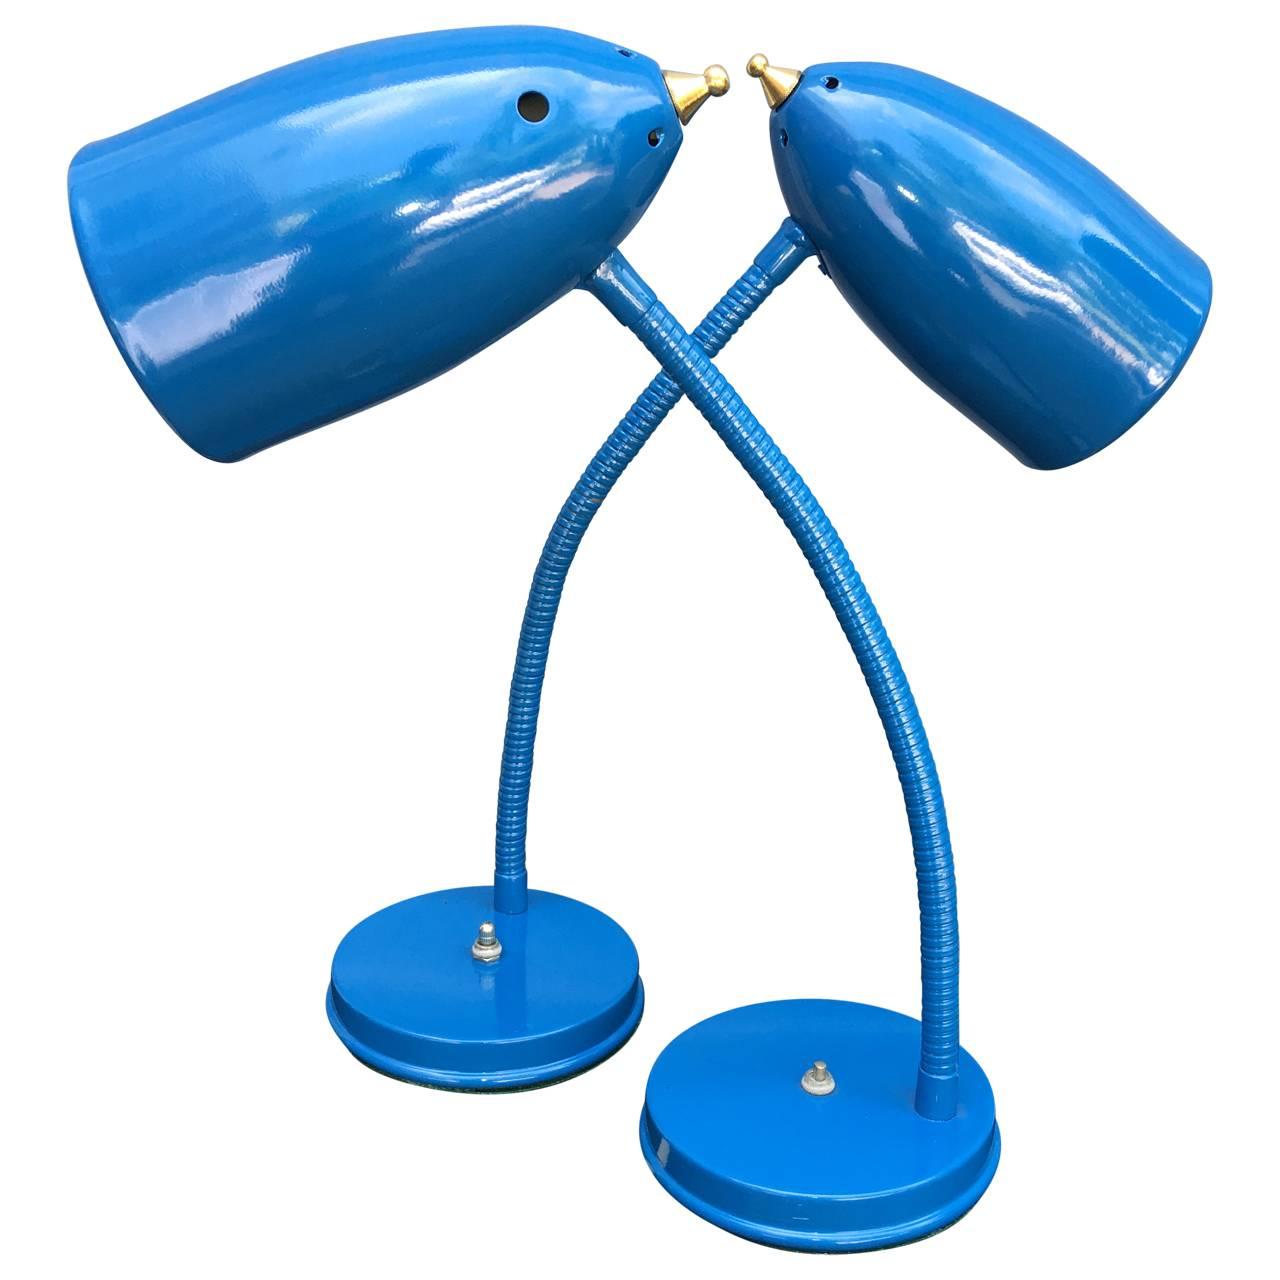 Pair of goose neck table lamps.